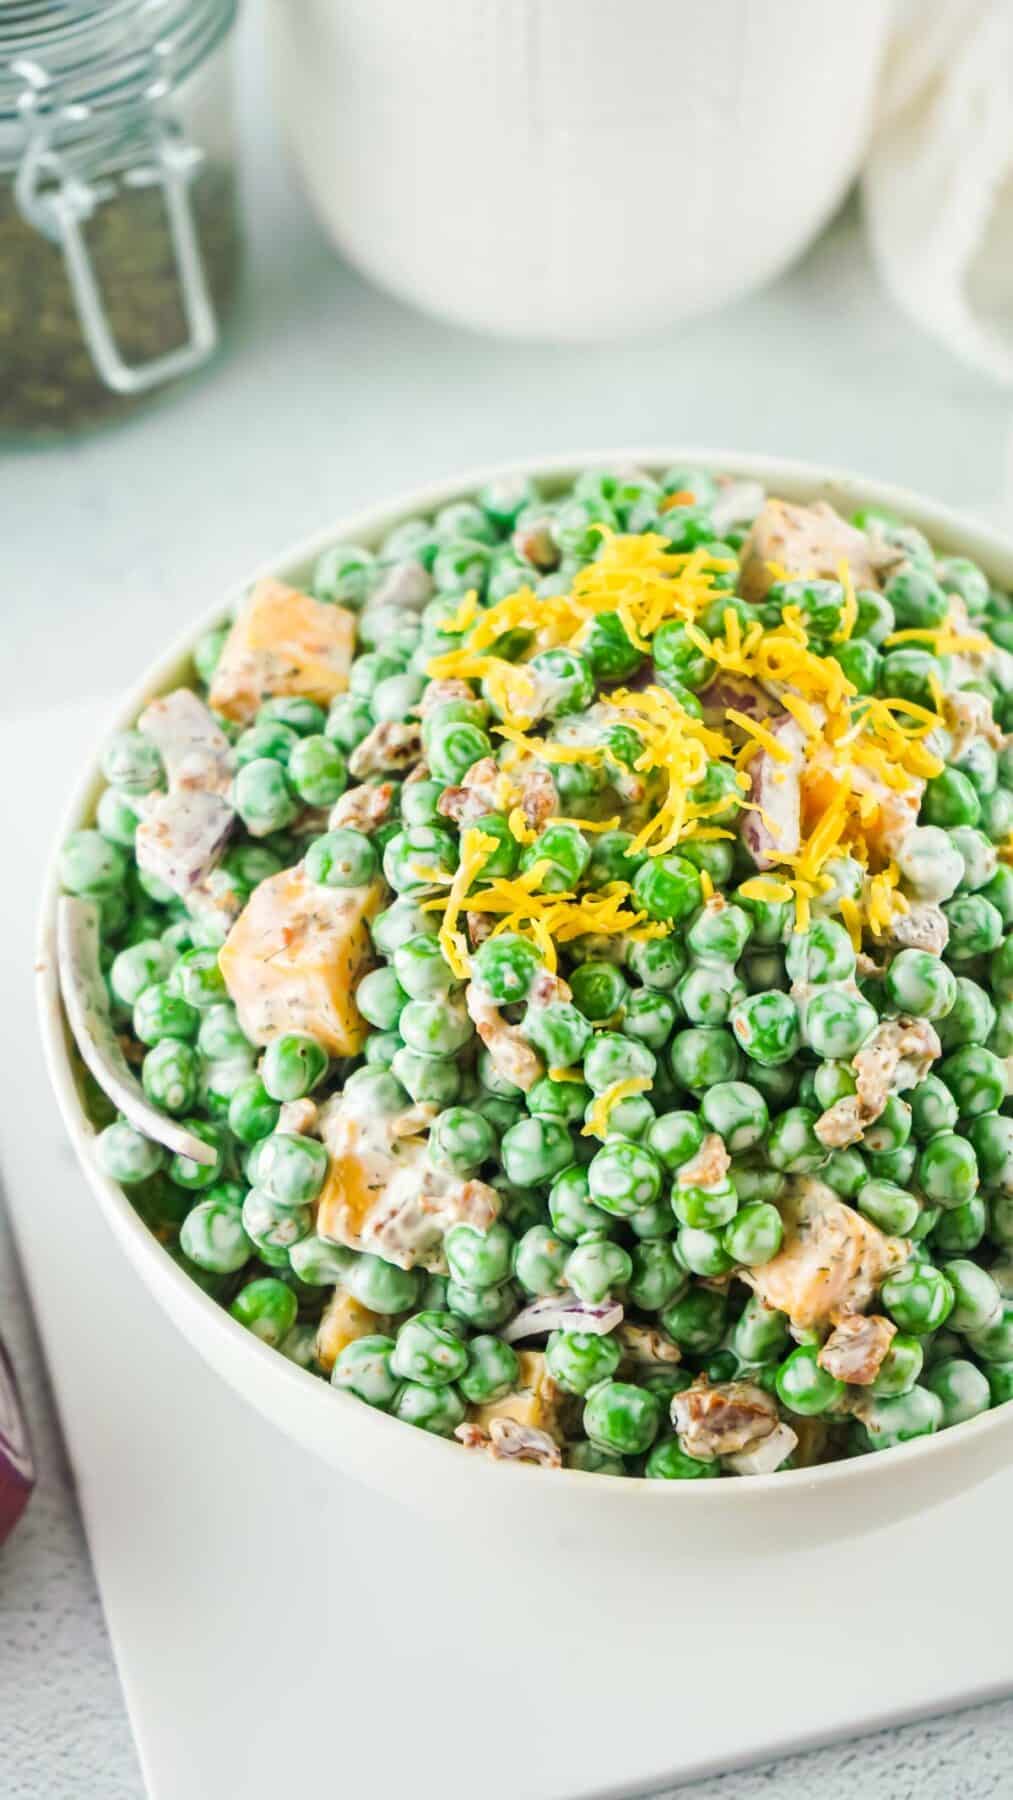 Old fashioned pea salad in a white bowl topped with shredded cheese.